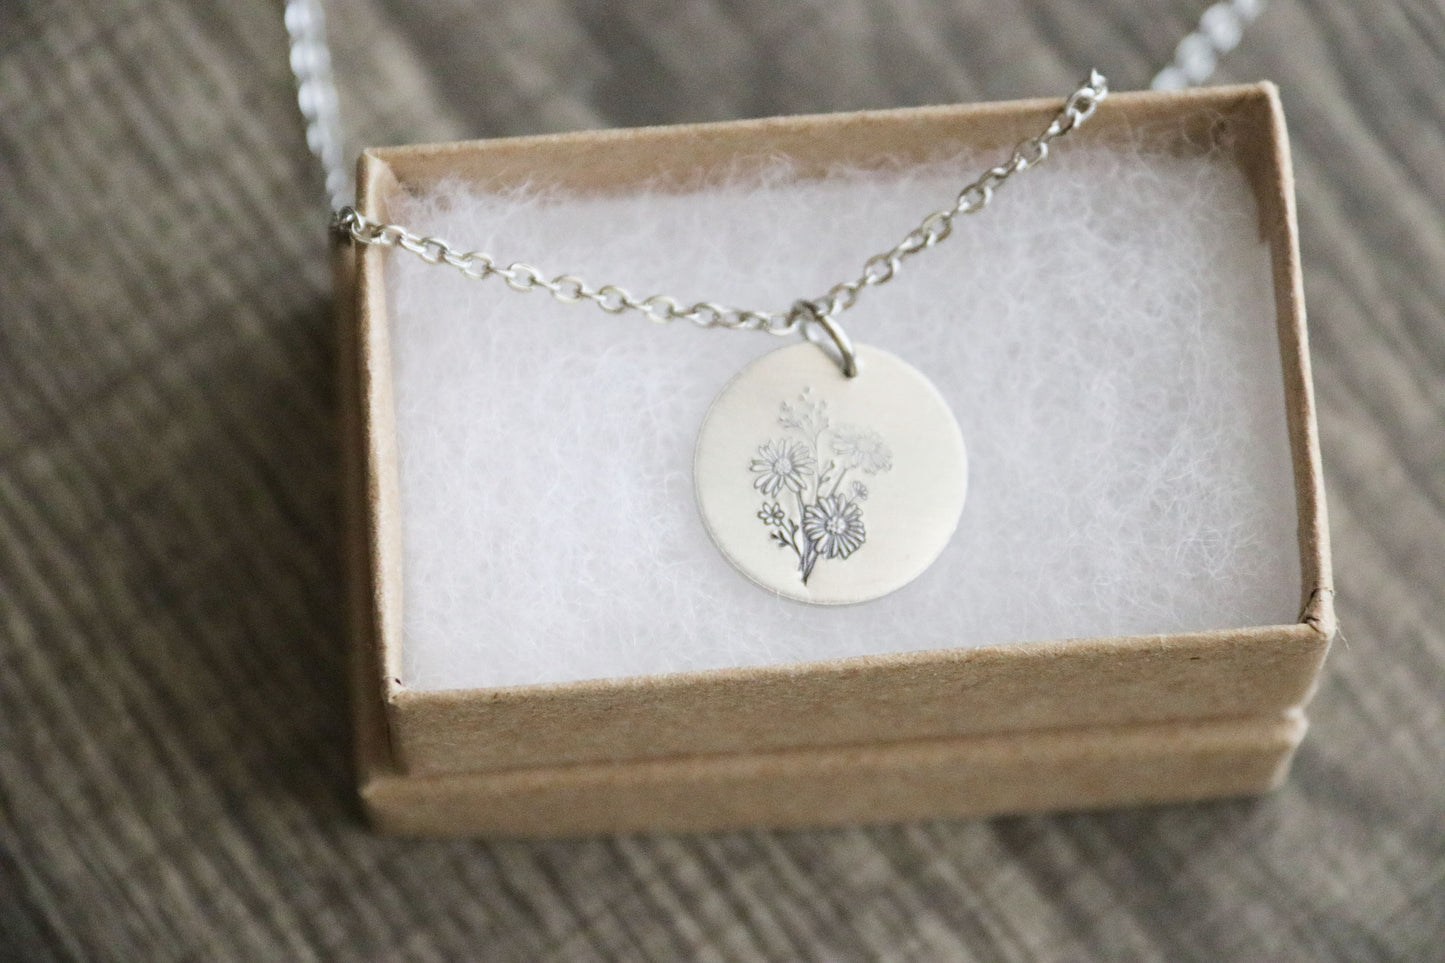 Daisy Necklace Hand Stamped, Personalized Optional